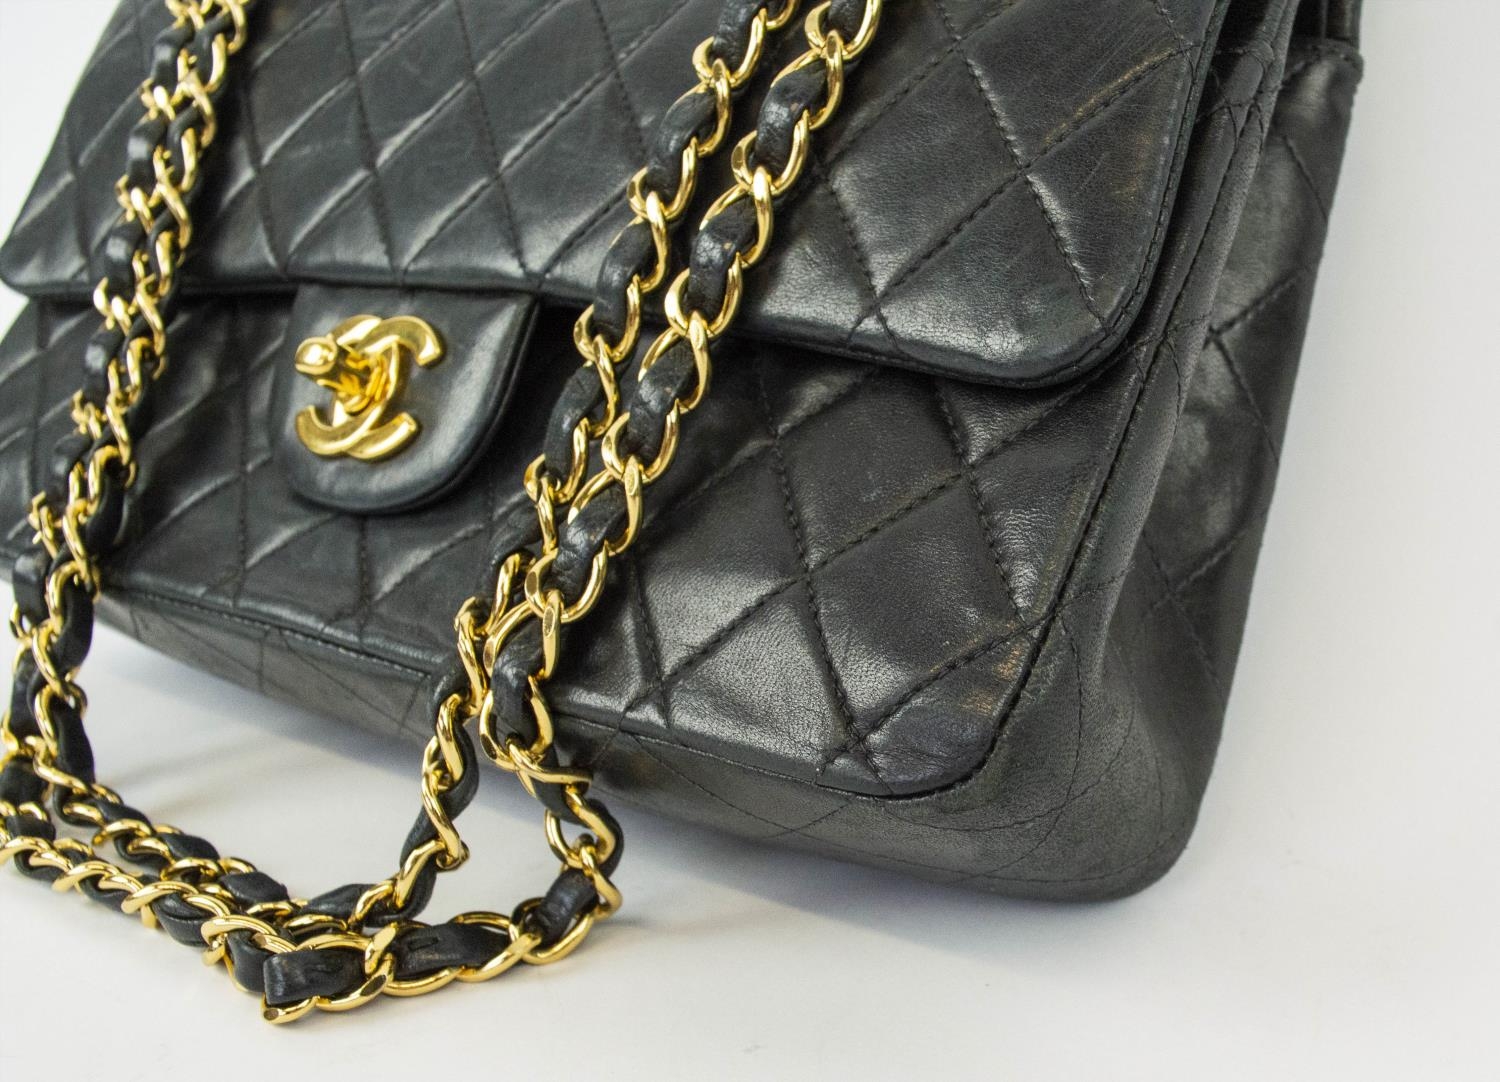 CHANEL FLAP BAG, with front double flap closure, quilted effect and gold hardware, chain and leather - Image 5 of 13